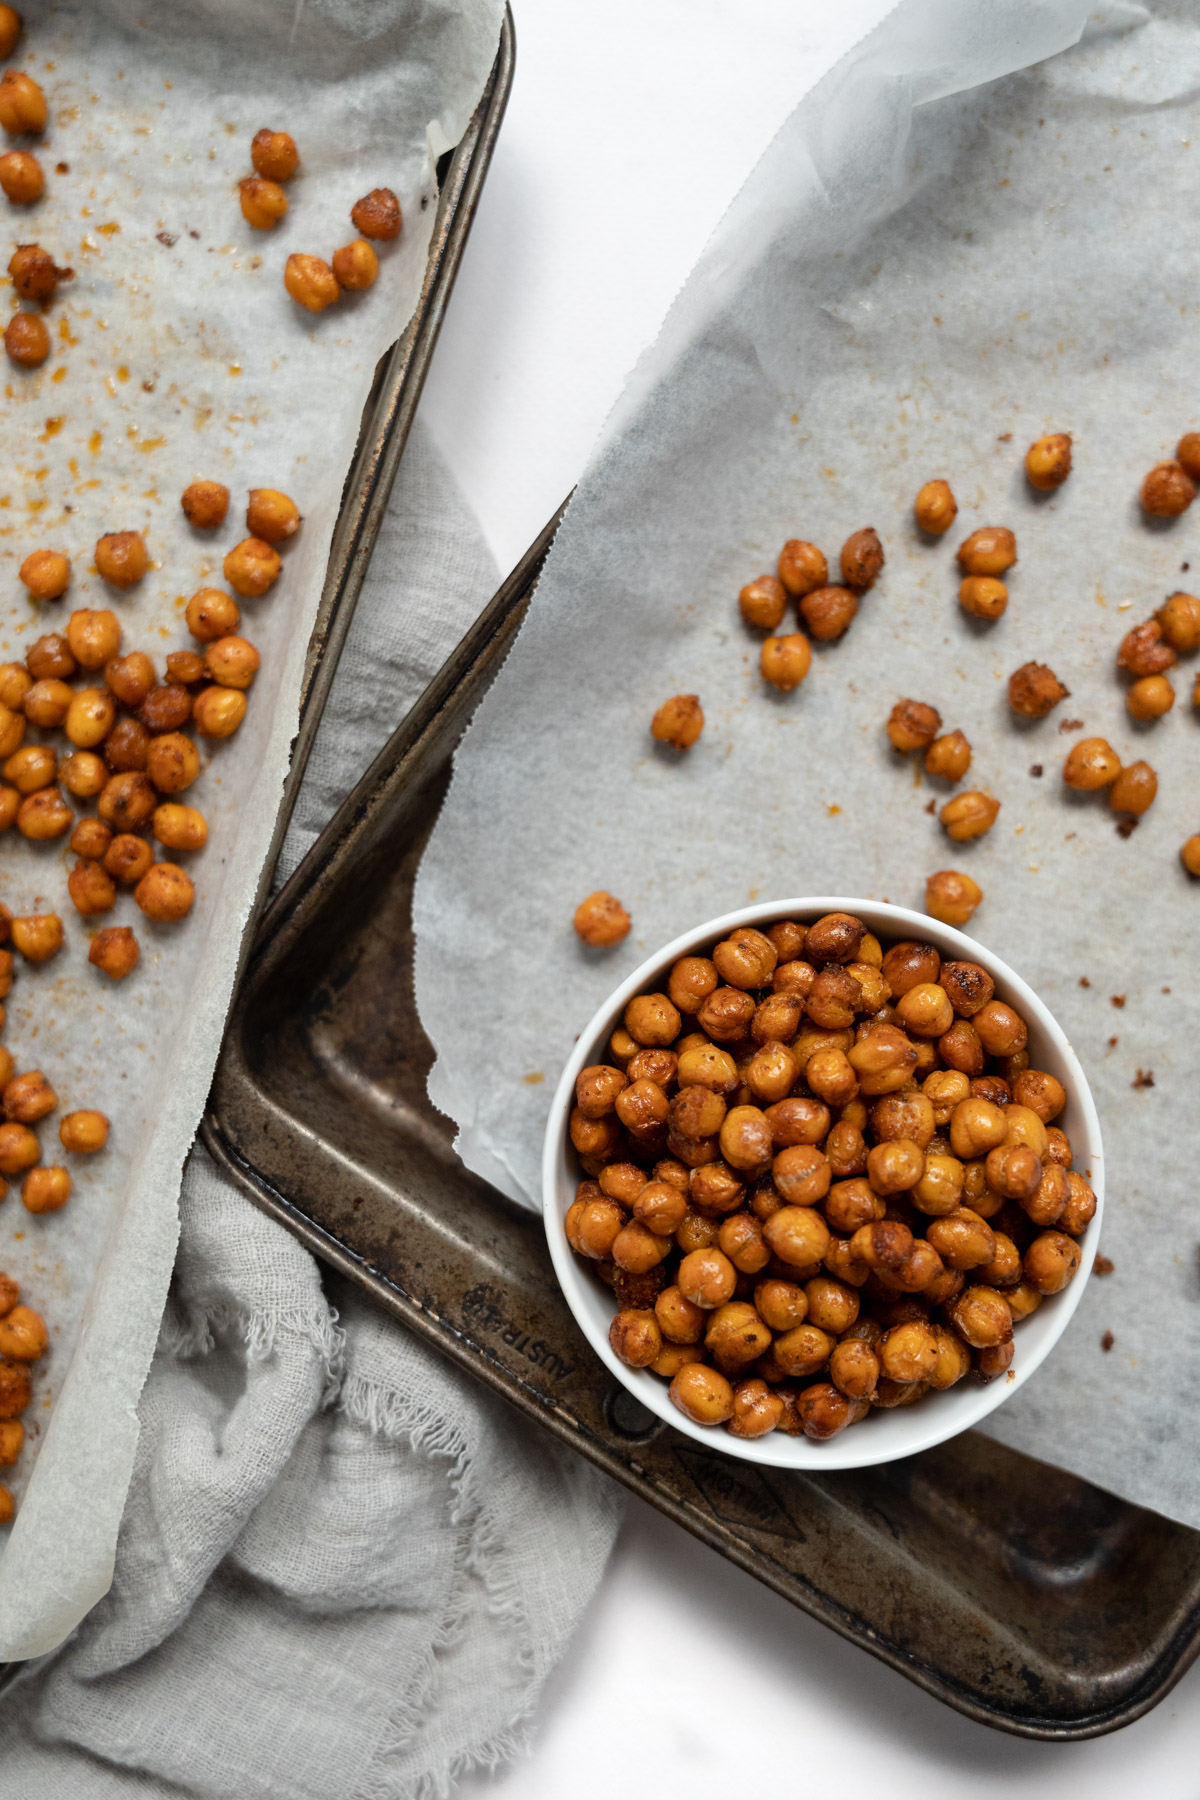 roasted chickpeas in a white bowl on a baking tray